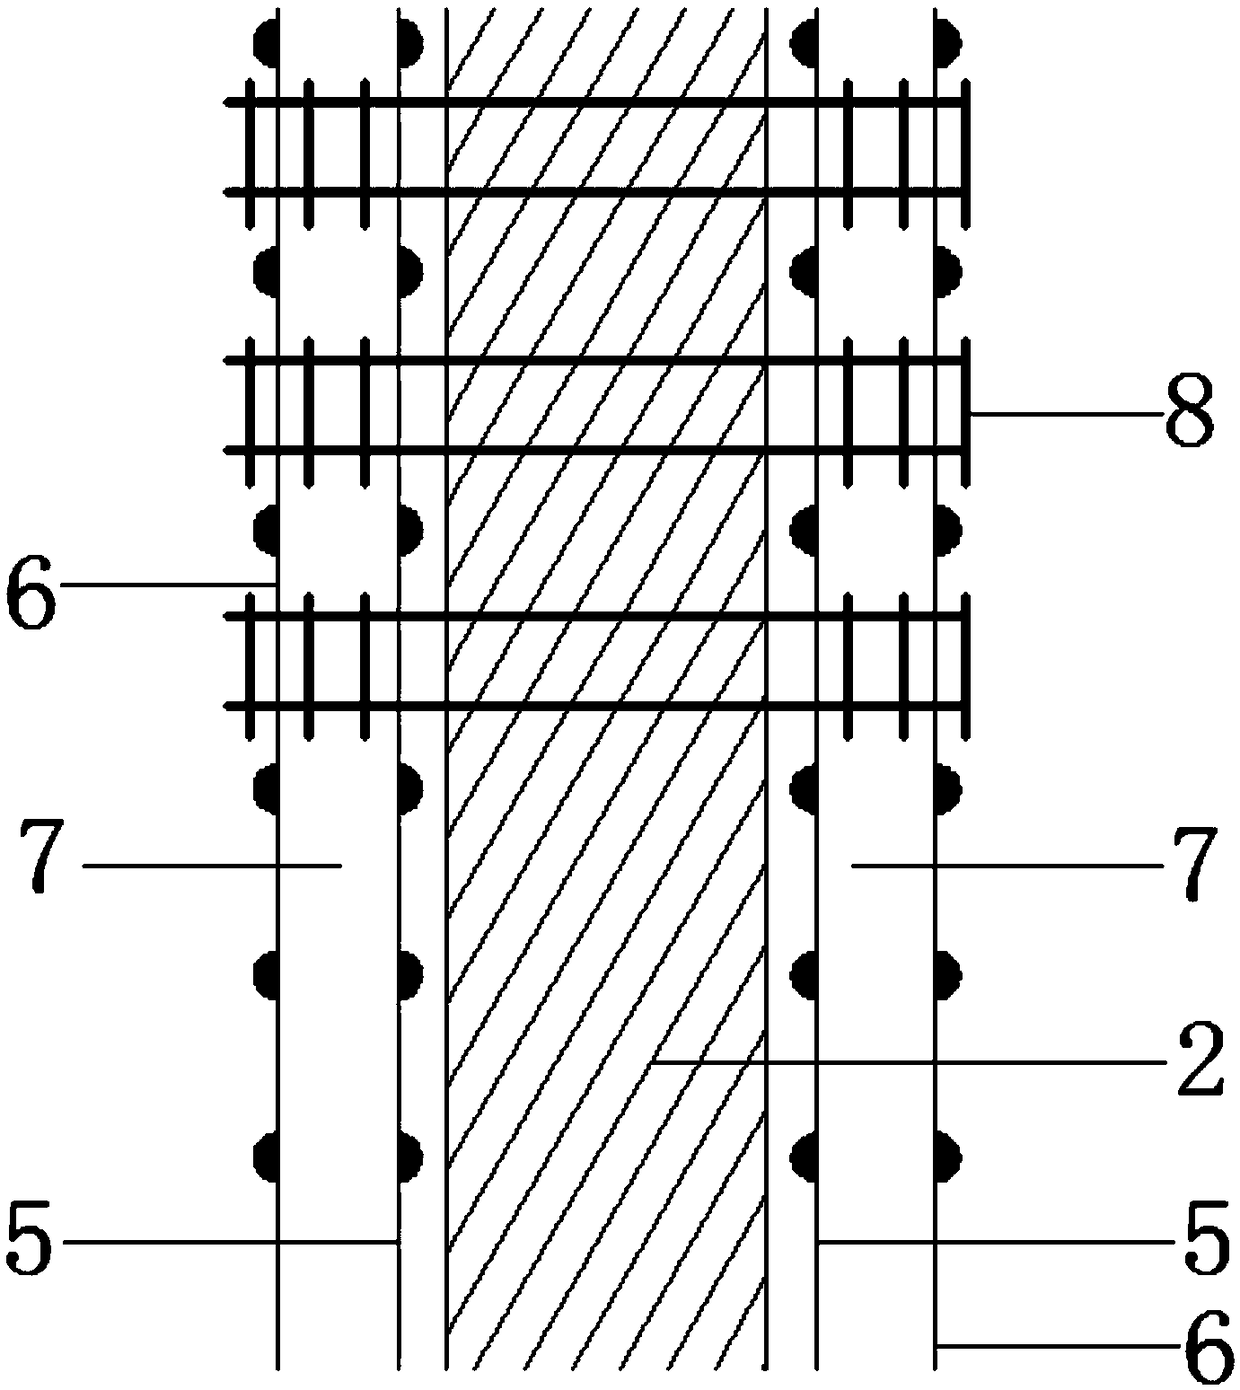 Modeling grid structure thermal insulation wall and construction method